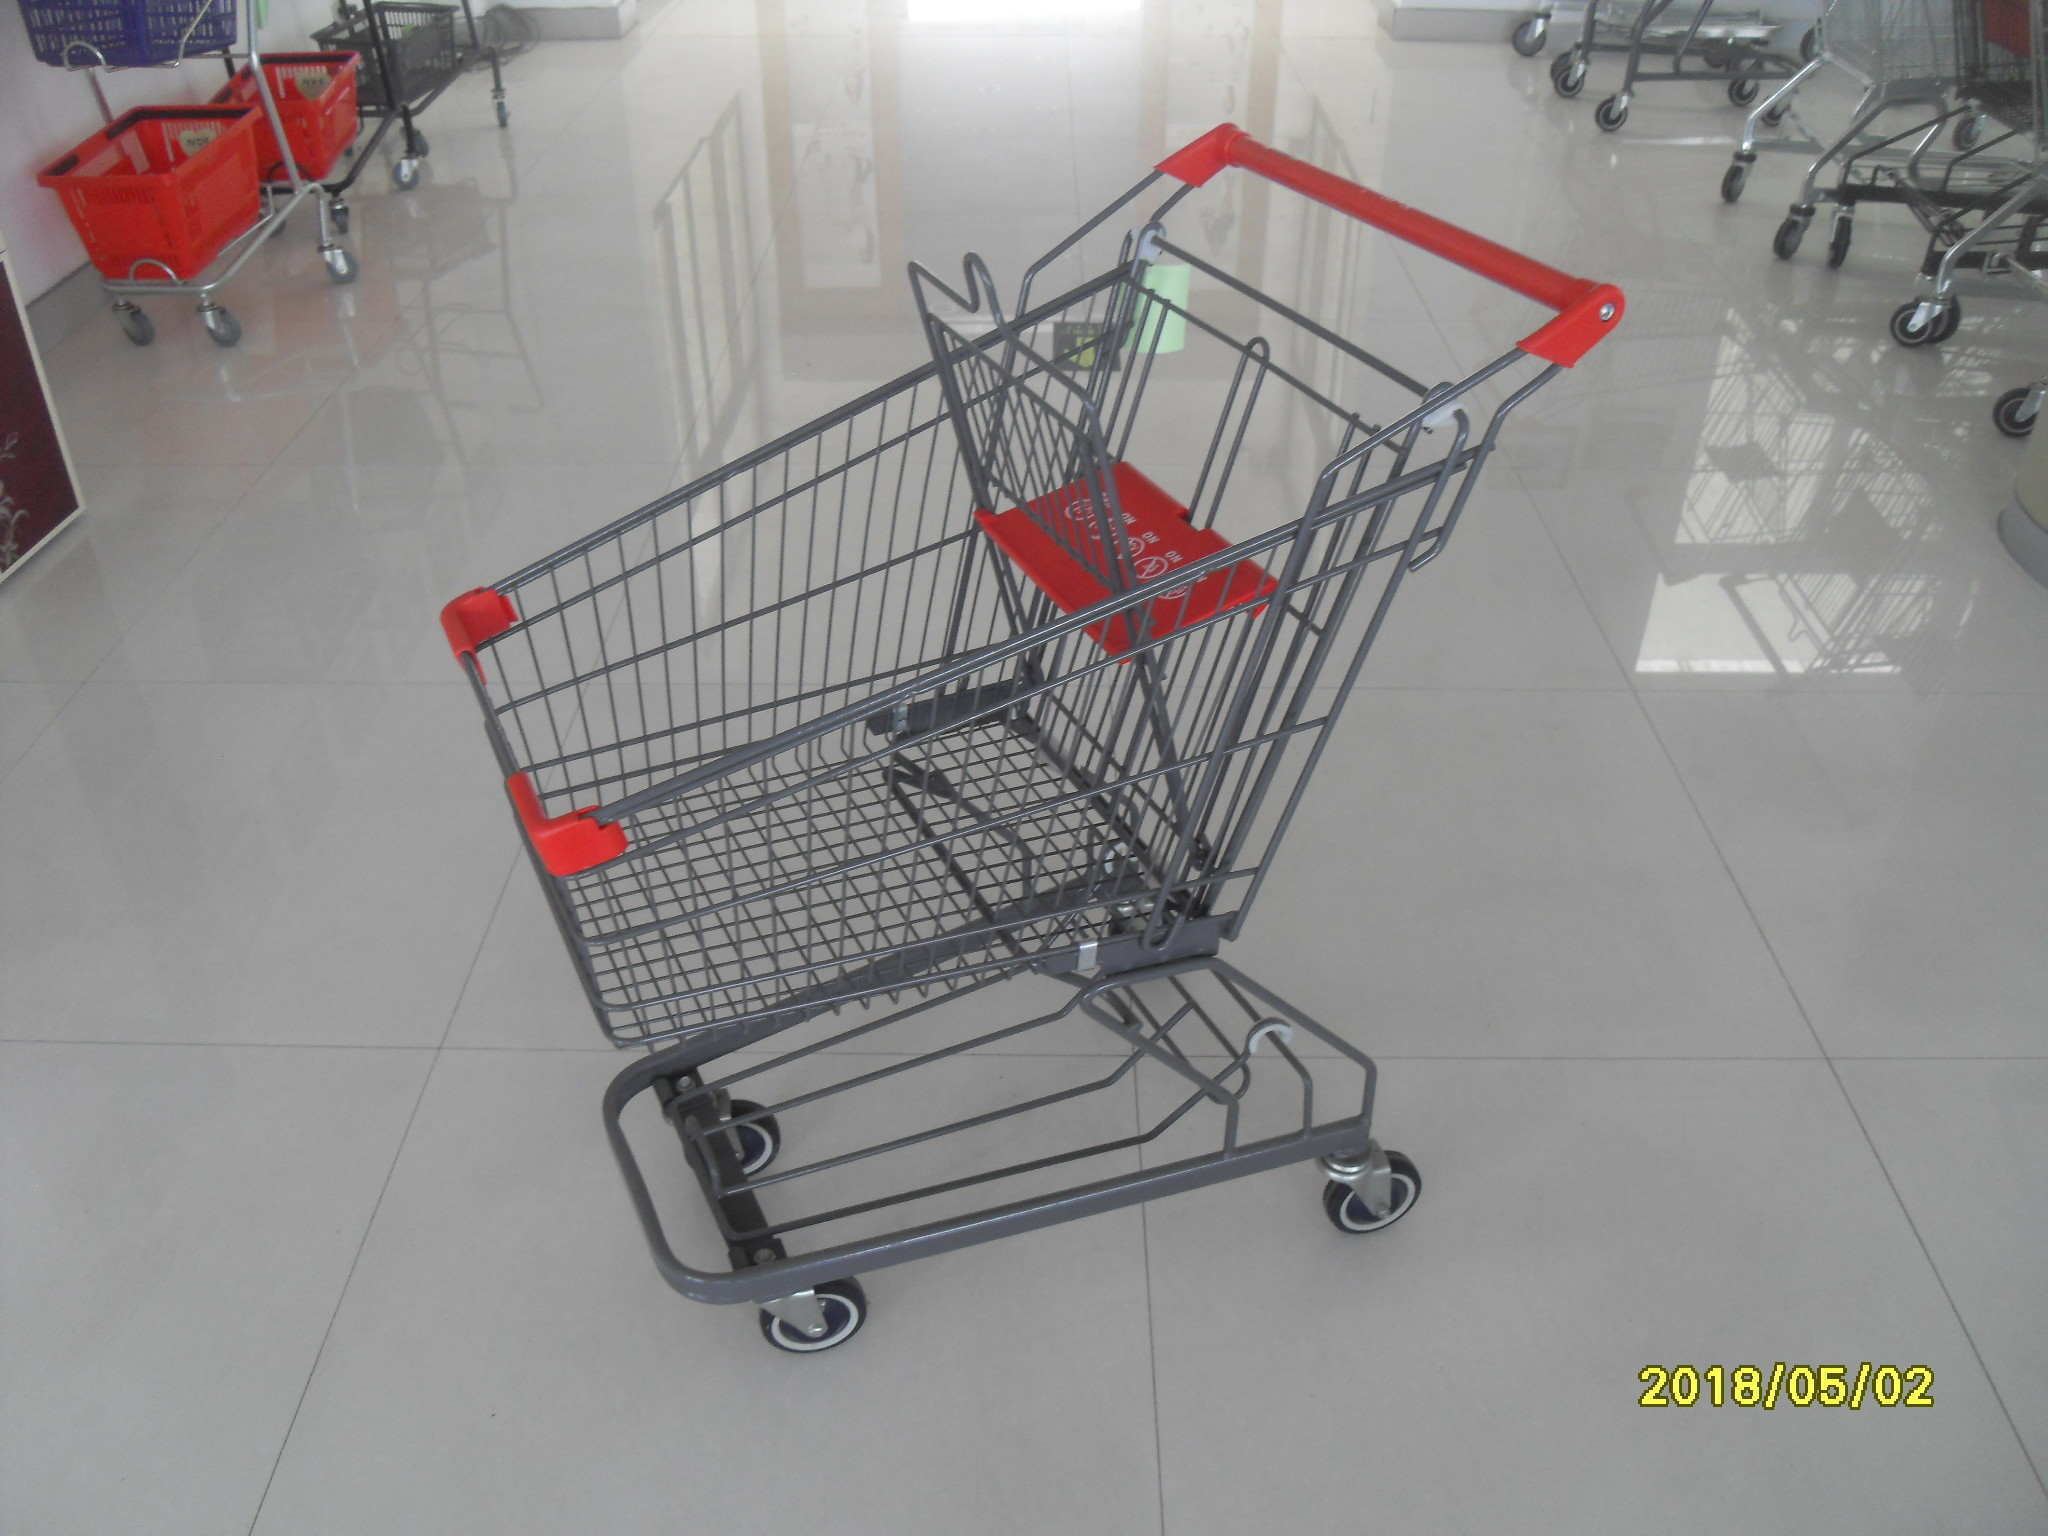 Grey Powder Coating 80L Supermarket Shopping Carts With 4 Inch PU Casters